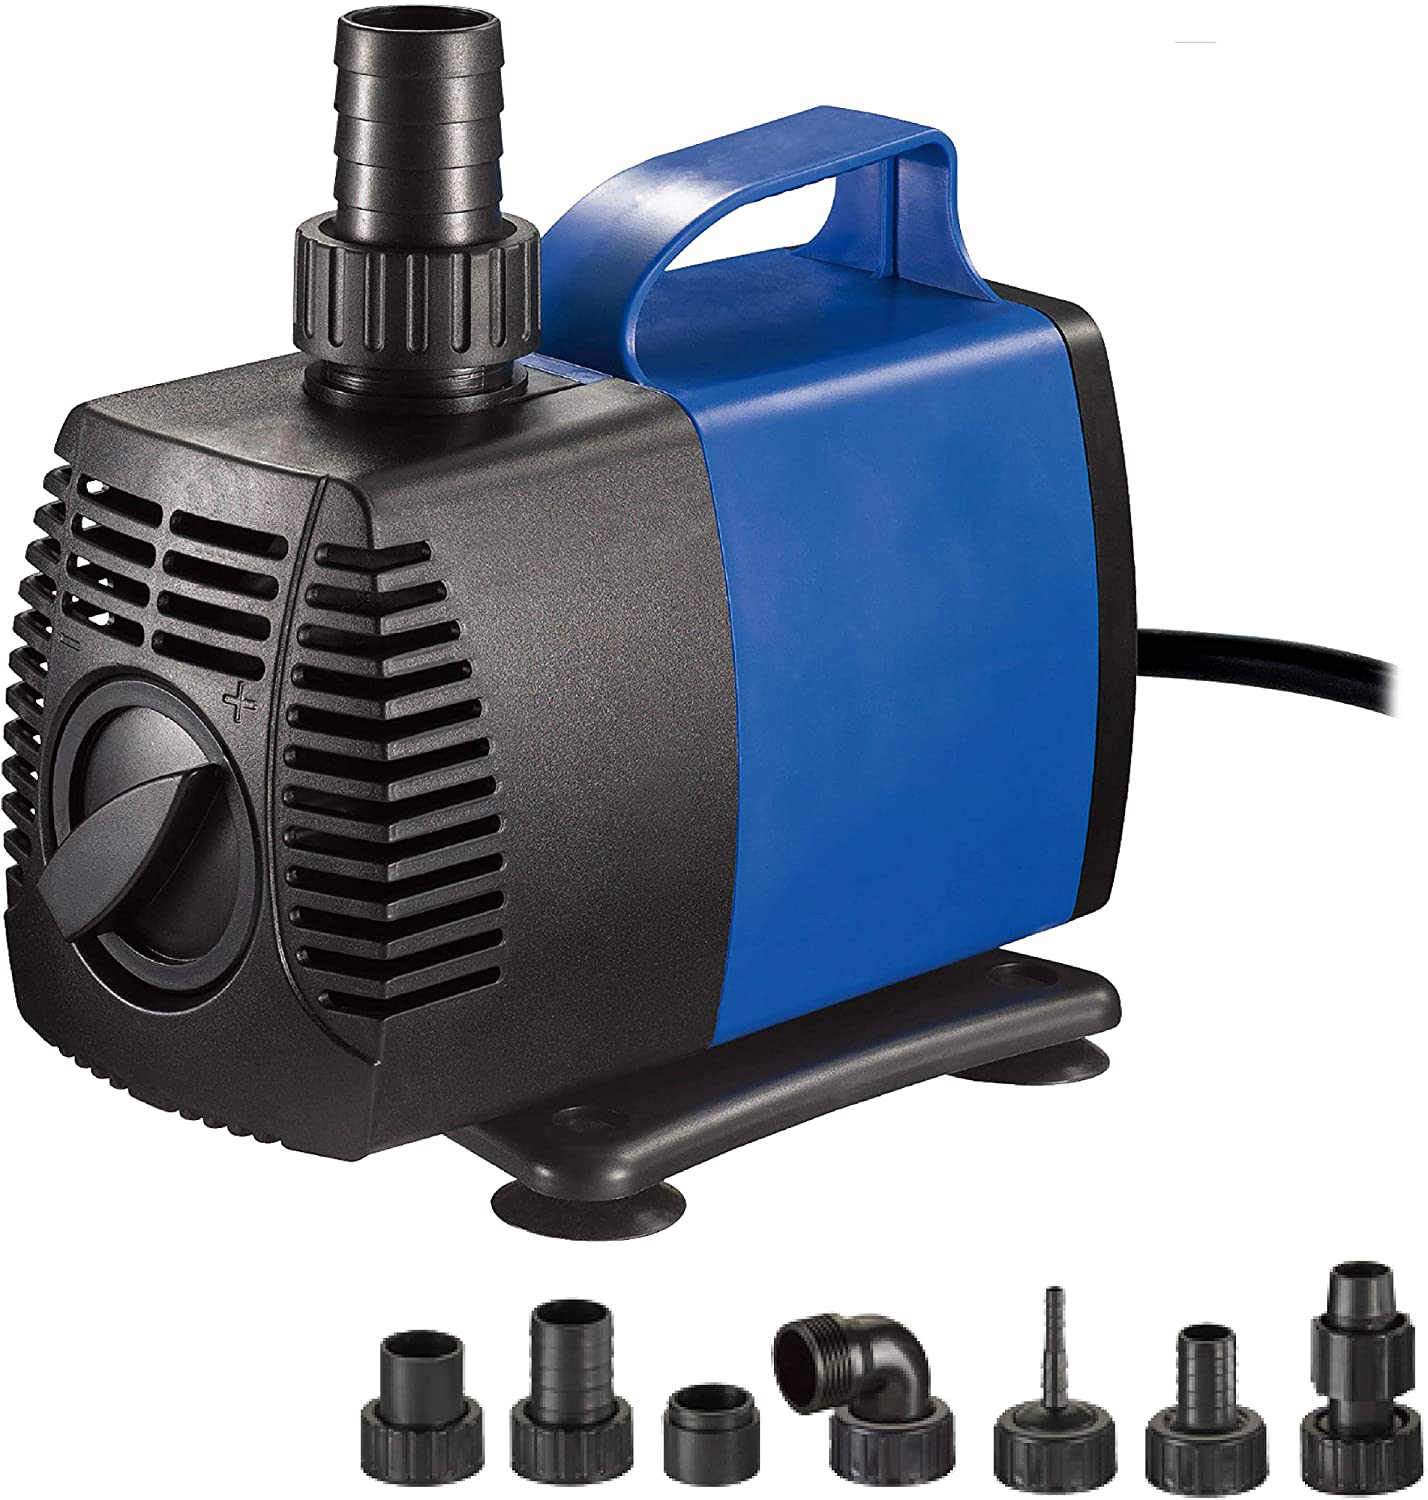 JAJALE JD Submersible Water Pump Ultra Quiet for Pond,Aquarium,Fish Tank,Fountain,Hydroponics Animals & Pet Supplies > Pet Supplies > Fish Supplies > Aquarium & Pond Tubing Tiger Mountain Industrial Co. Blue; 1 Pack 1200 GPH 